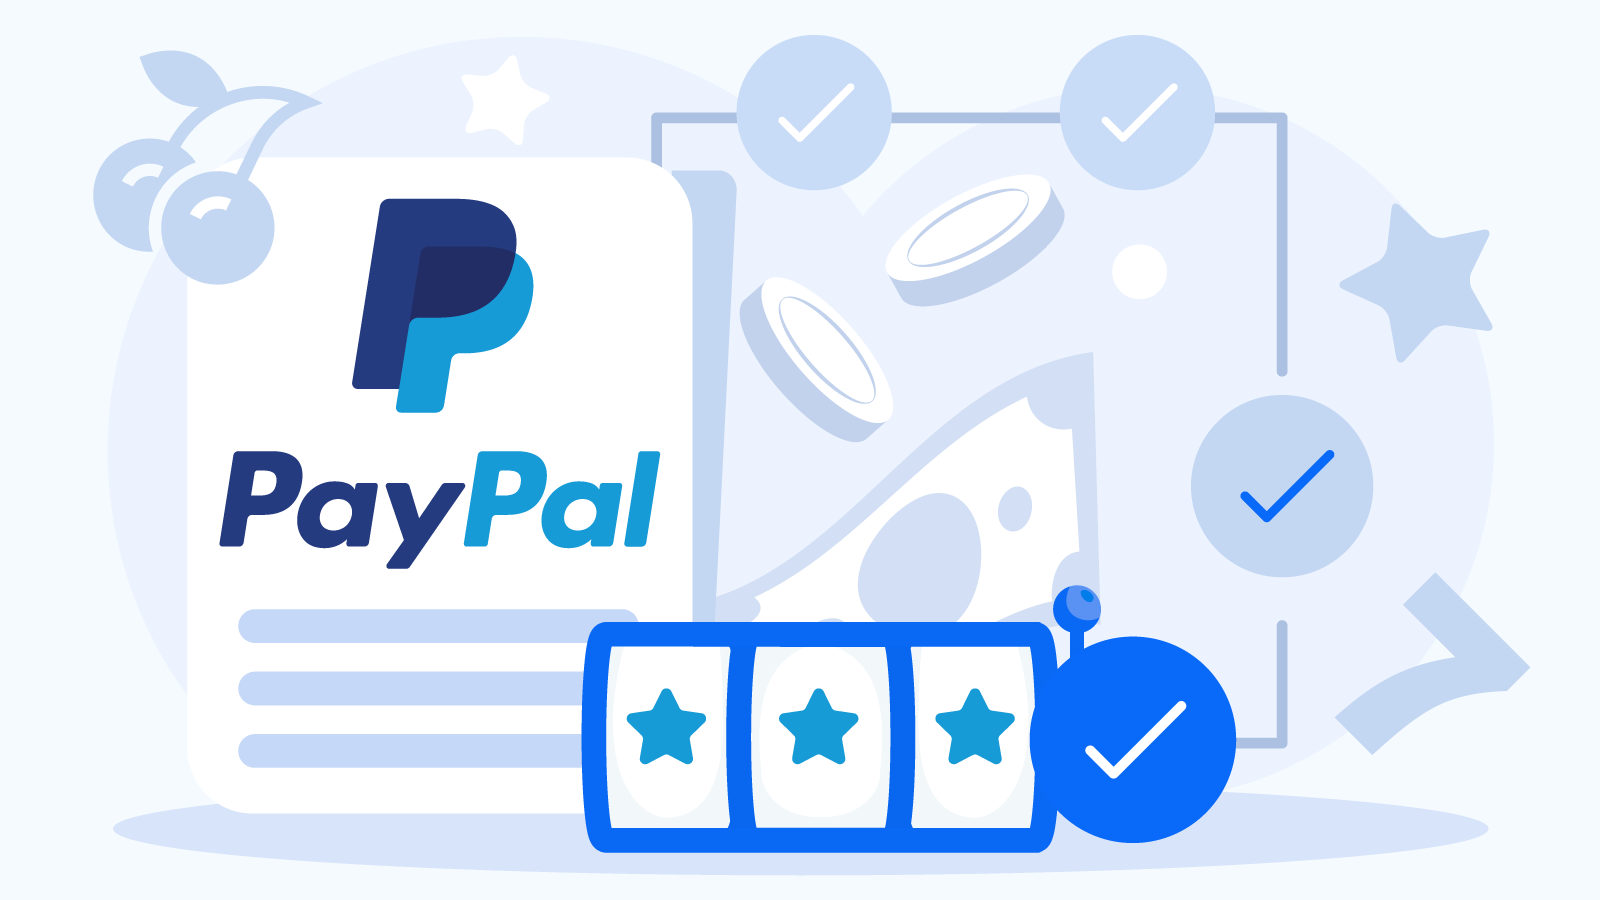 Player’s Guide for Safe and Swift PayPal Deposits